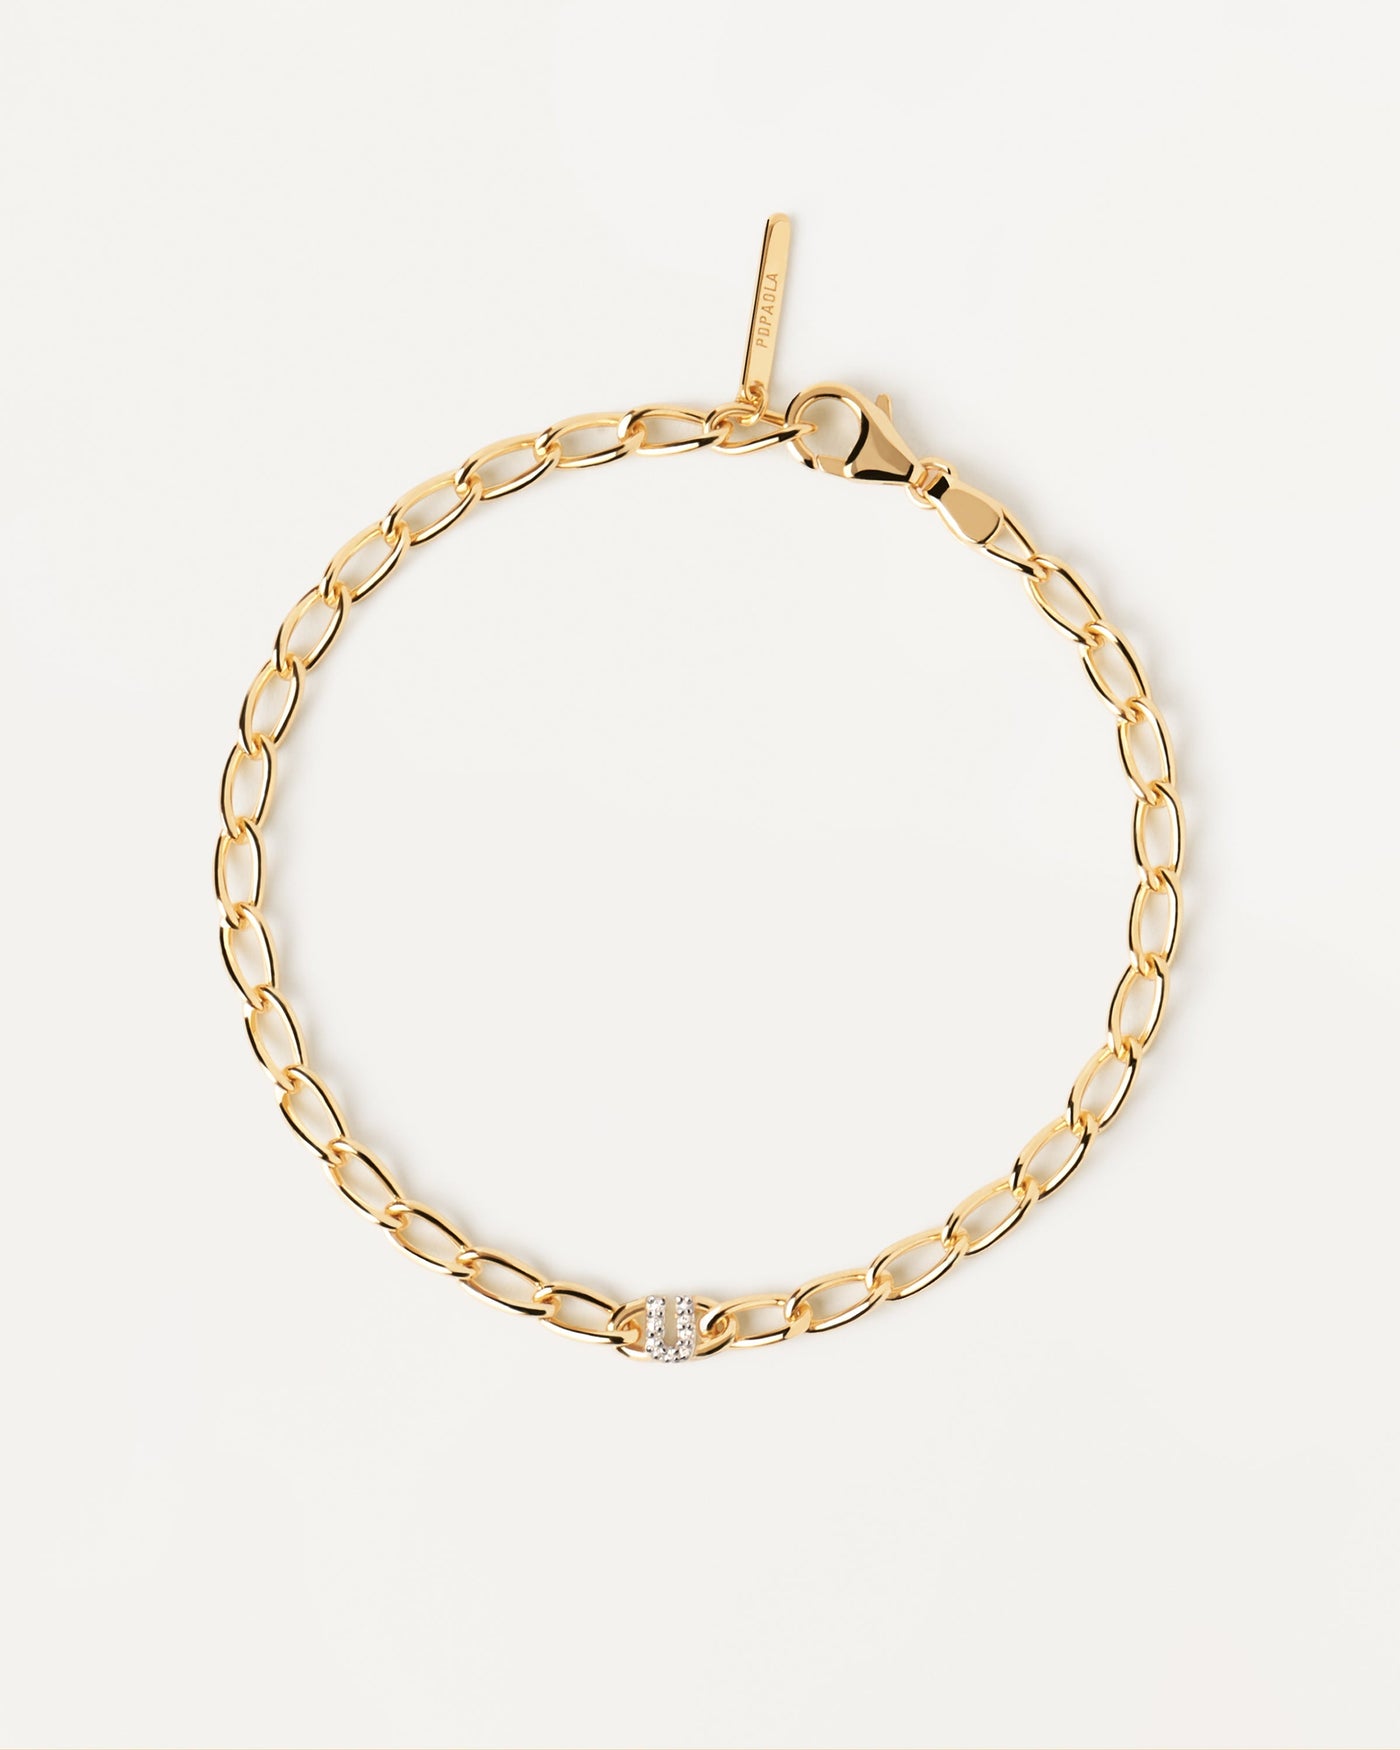 2023 Selection | Letter U Chain Bracelet. cable chain bracelet in gold-plated silver with initial U in zirconia. Get the latest arrival from PDPAOLA. Place your order safely and get this Best Seller. Free Shipping.